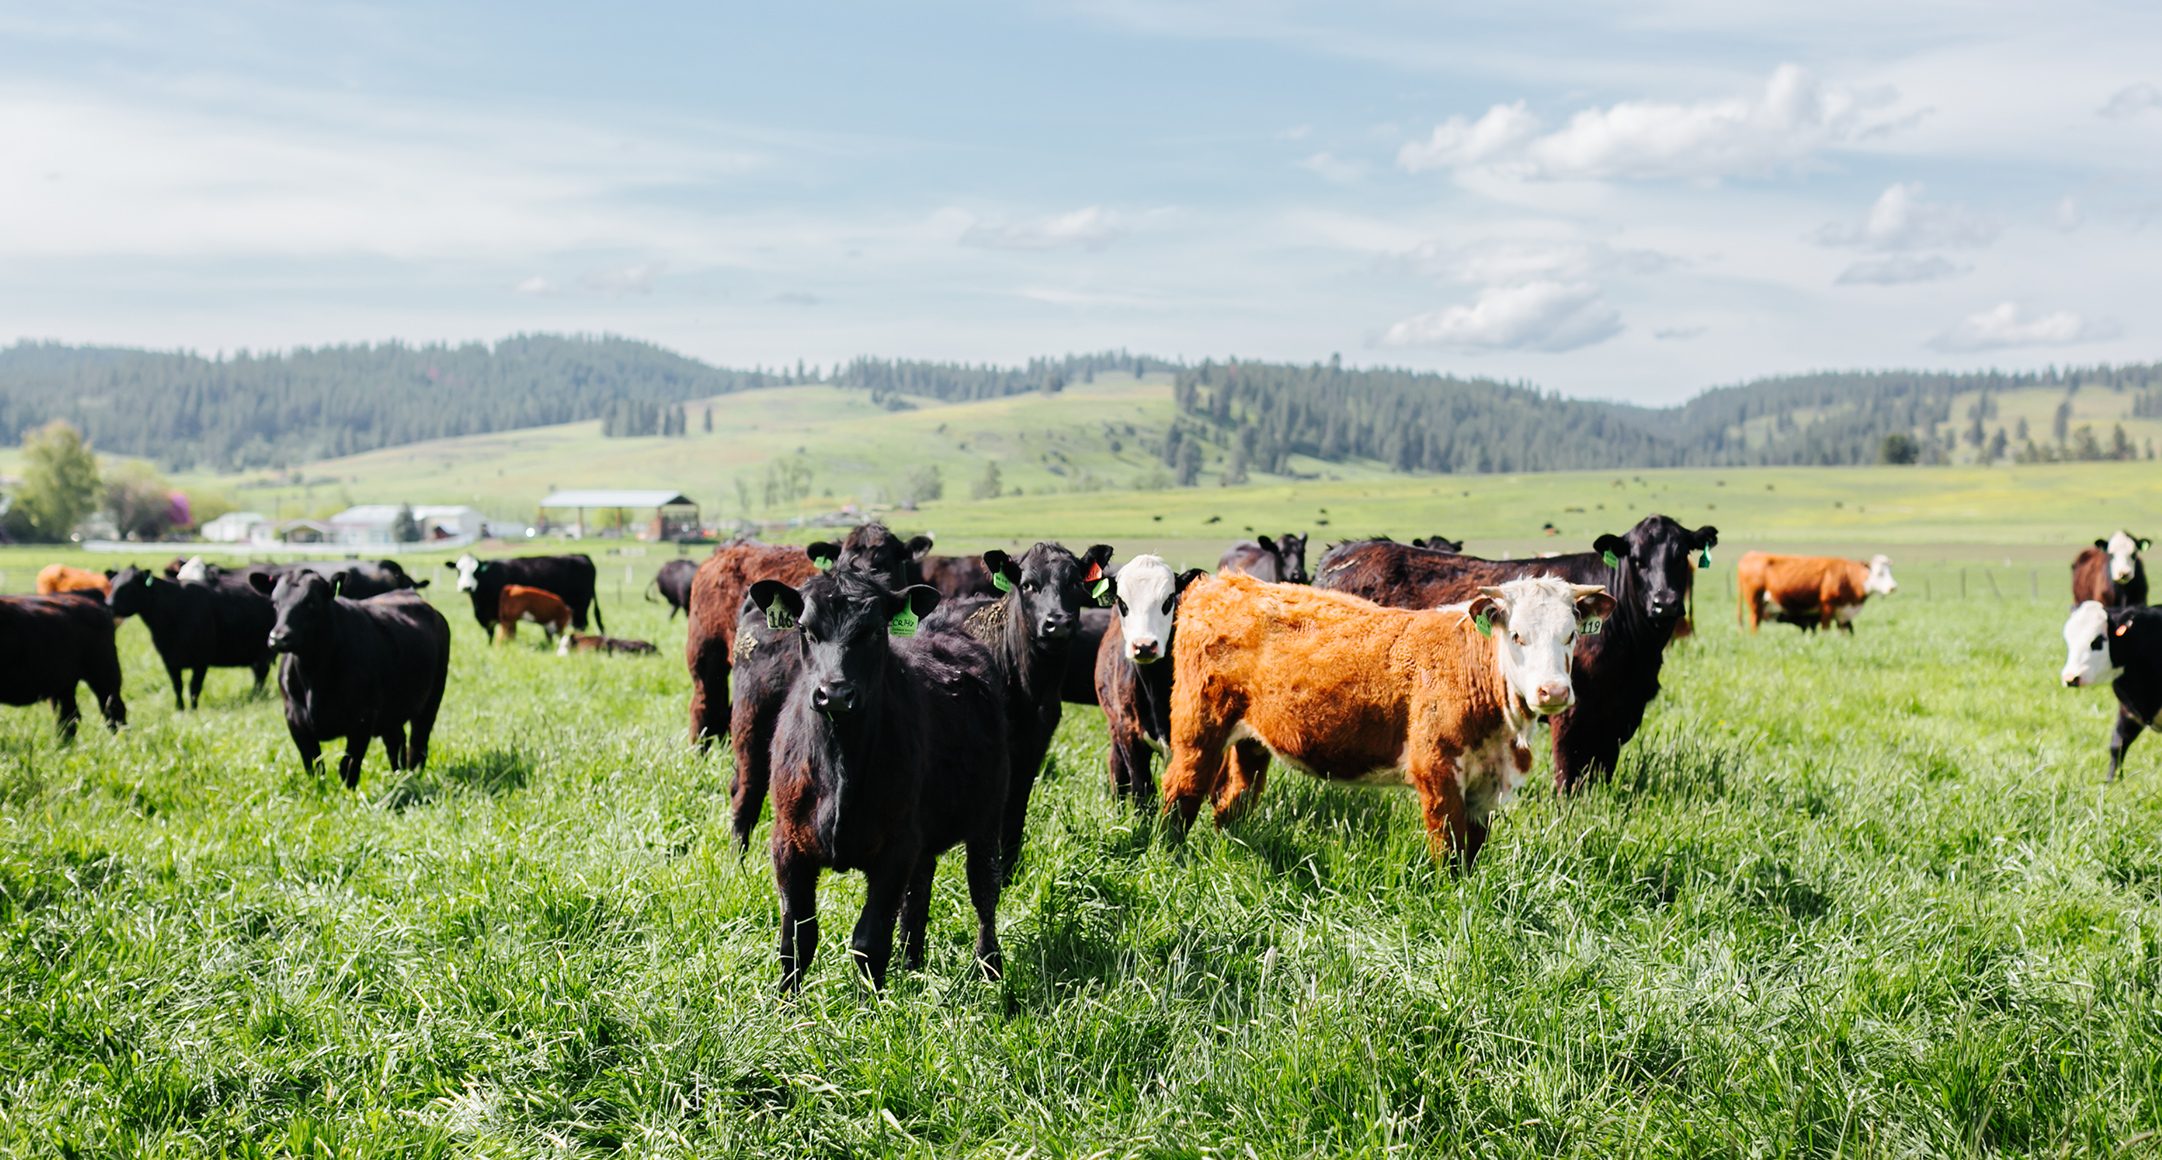 Carman Ranch humanely raised cattle grazing Oregon pasture 